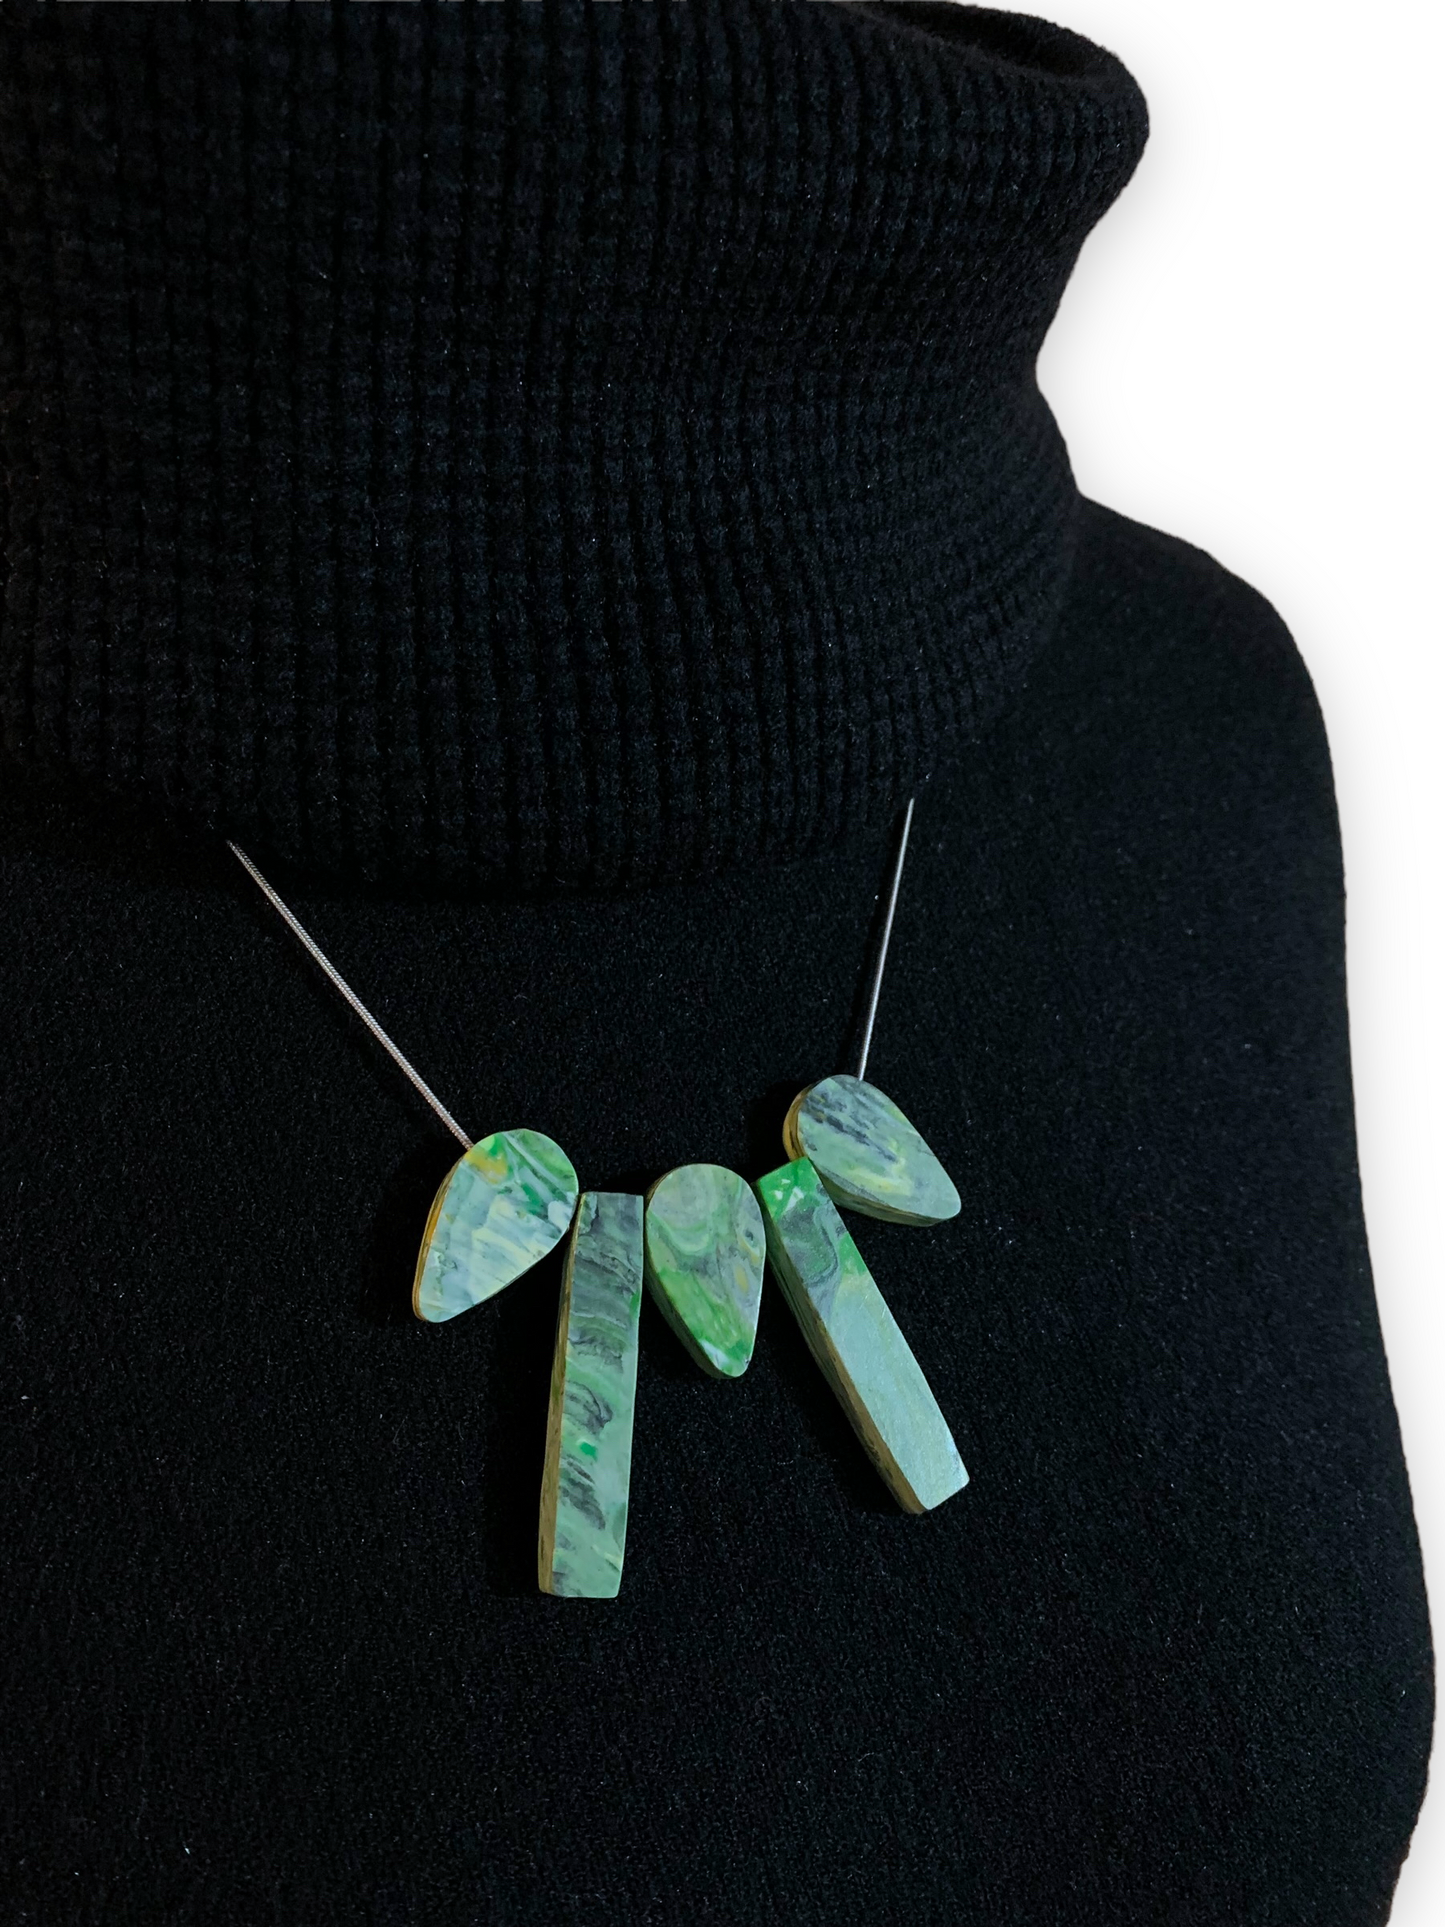 Recycled plastic necklace jewellery earrings studs handmade in London by Jagoda Jay Sudak Keshani eco gift for her him